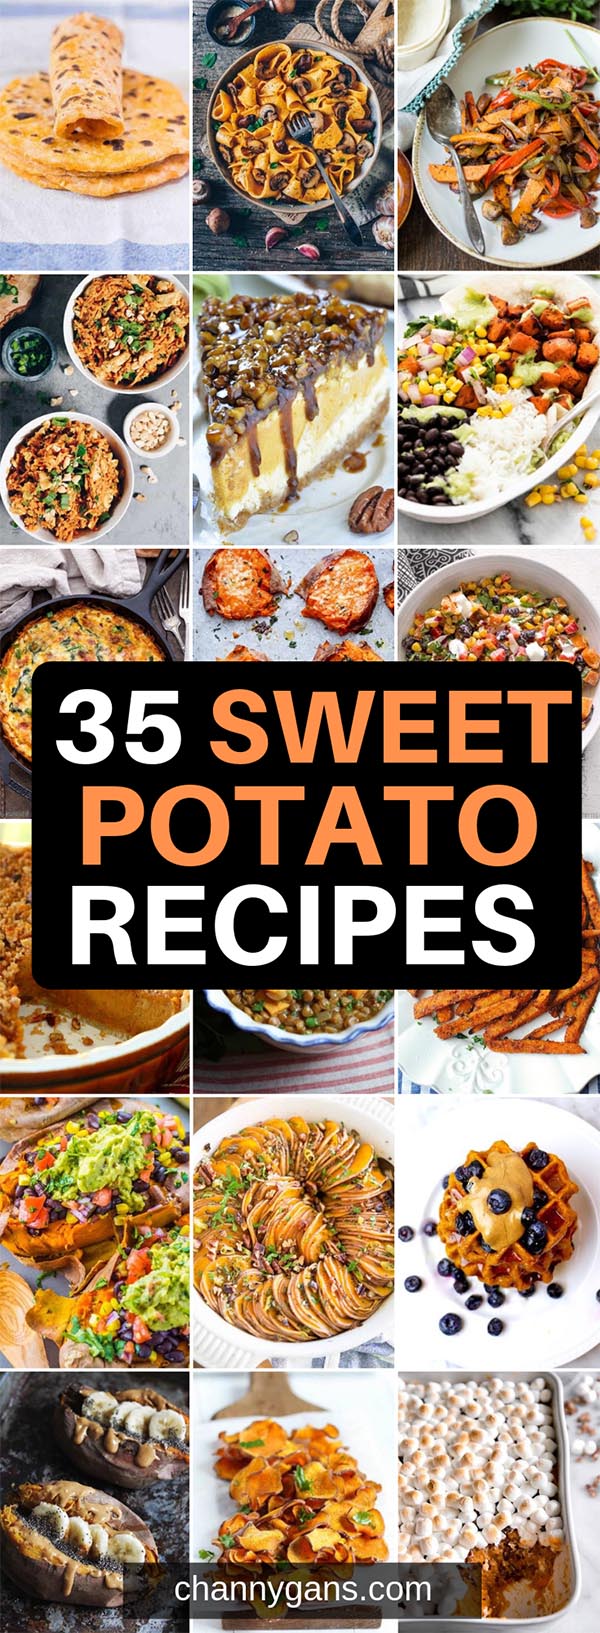 Sweet potatoes are so versatile, you can have them for breakfast, lunch or dinner and even dessert! Enjoy these 35 delectable sweet potato recipes.